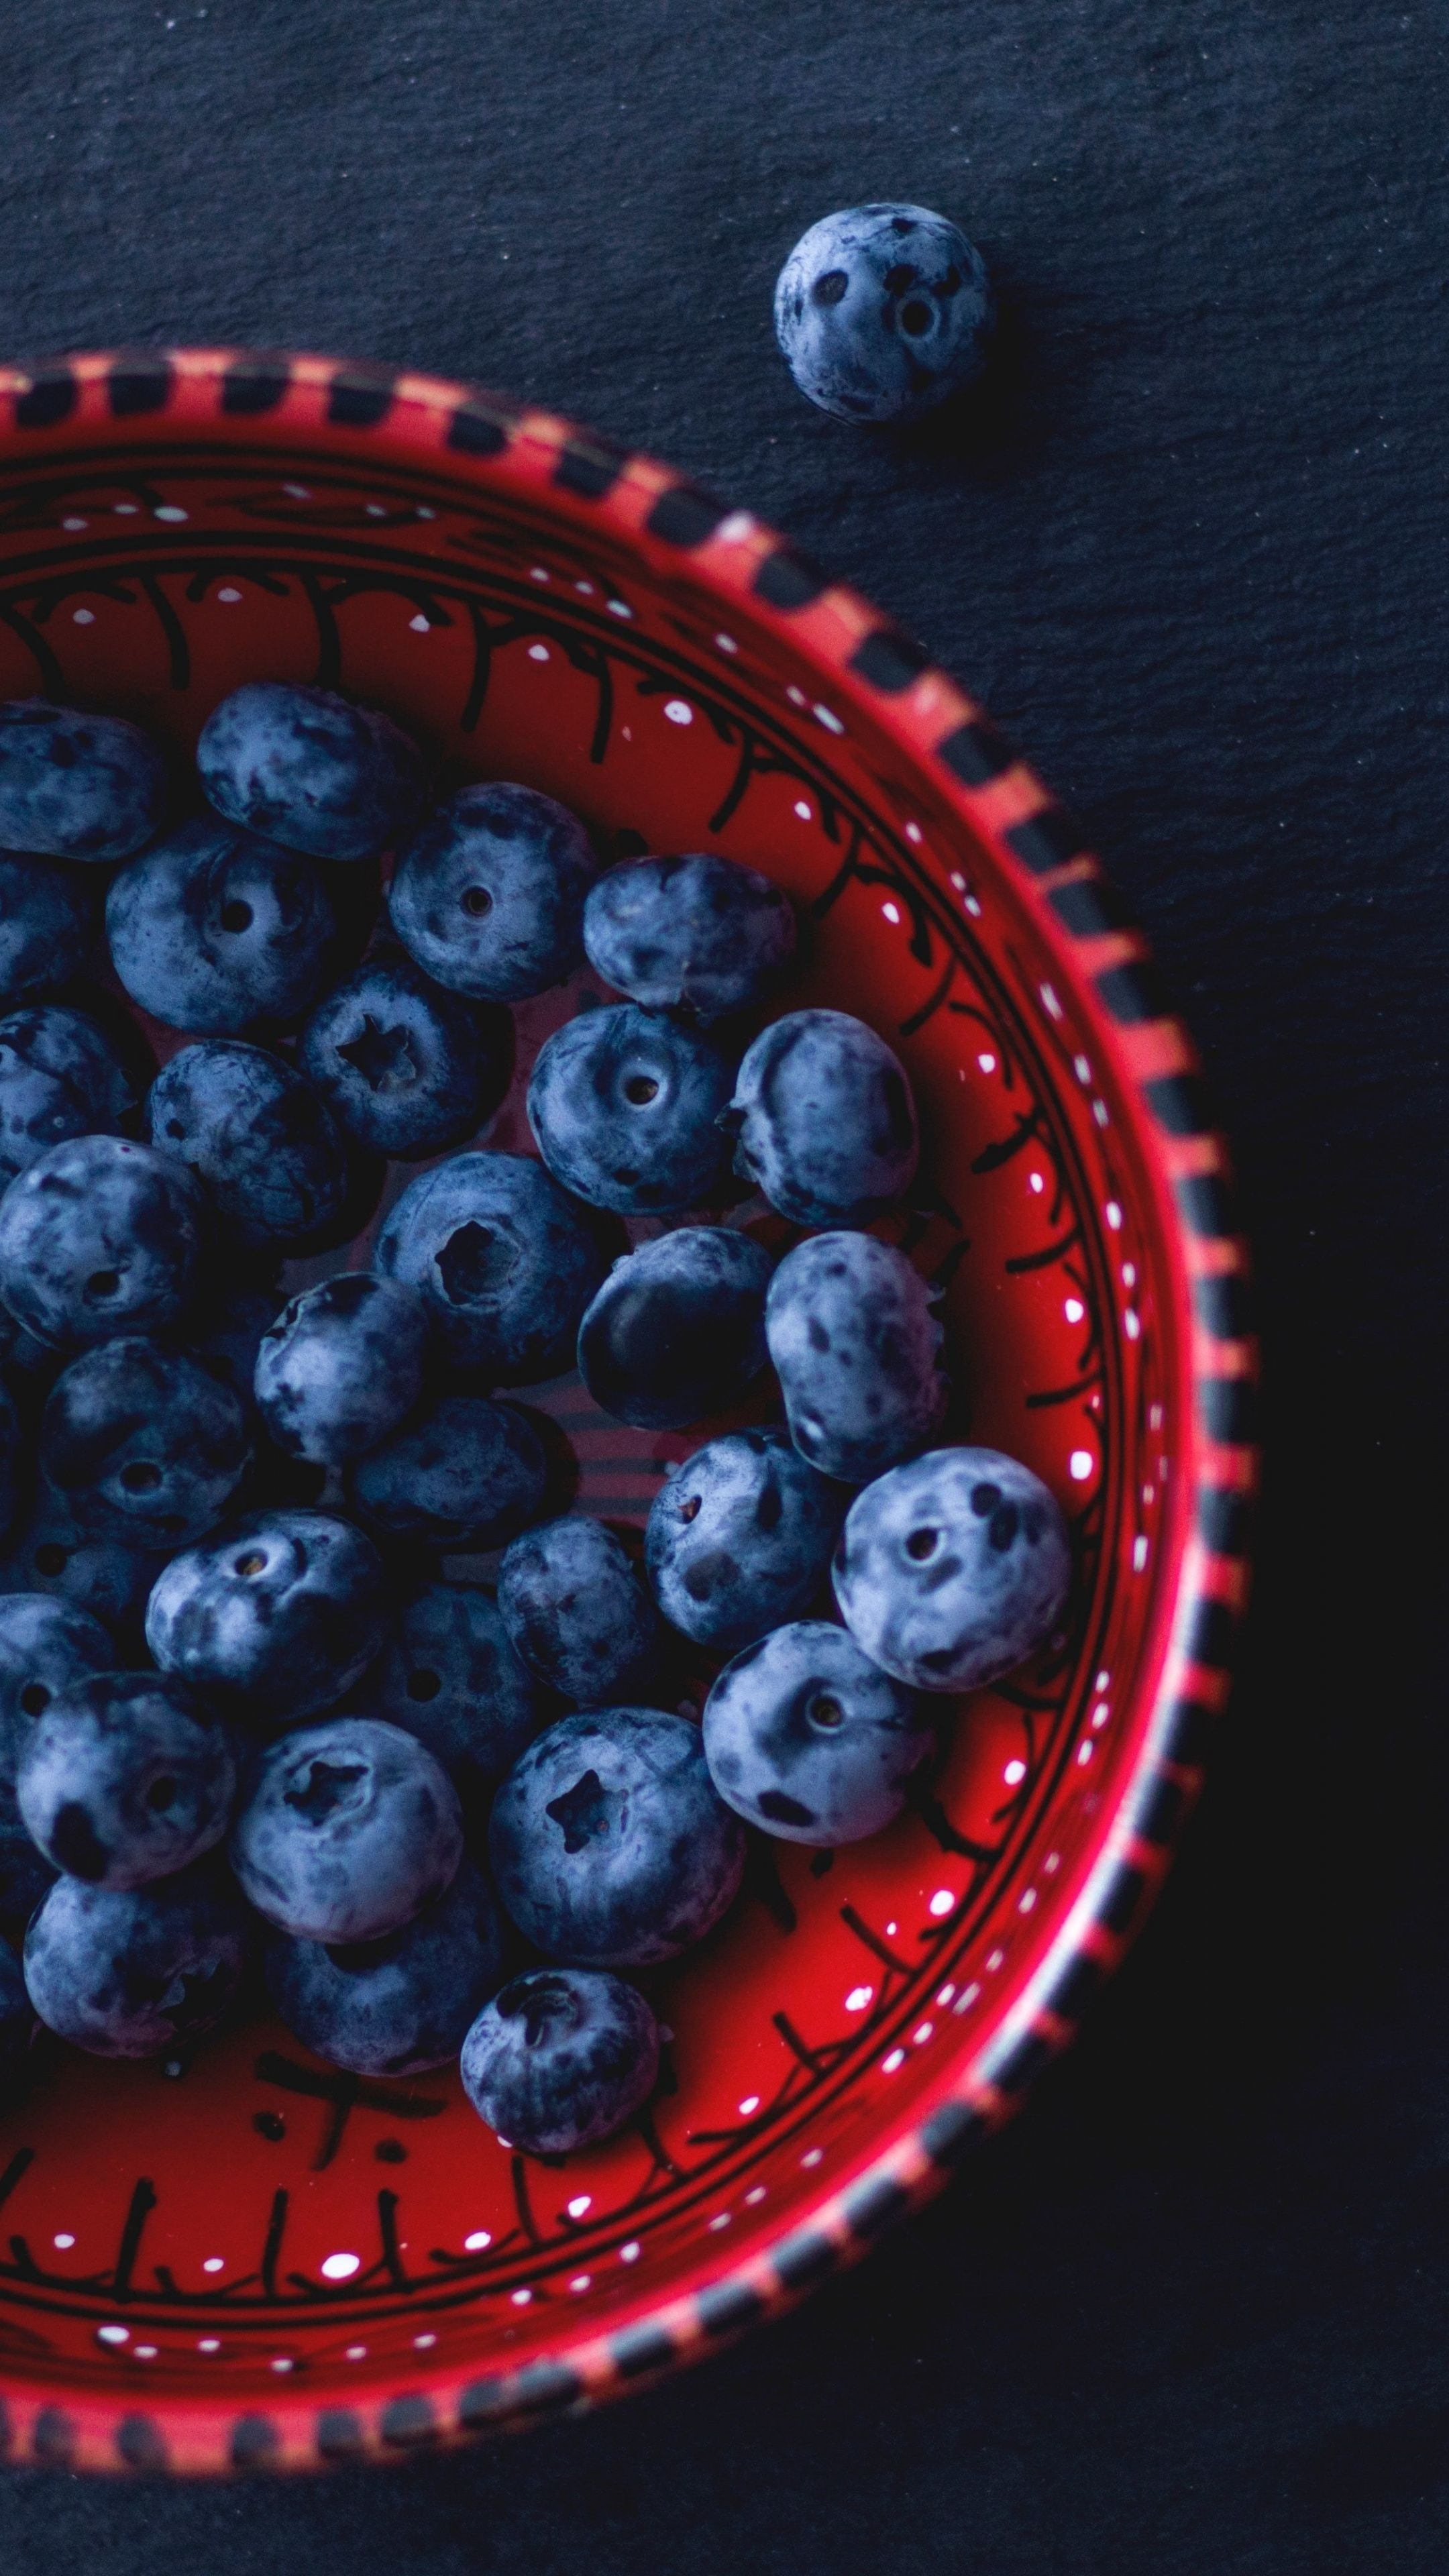 Blueberry bowl wallpaper, Sweet and sour combo, Tempting dessert, Mouth-watering image, 2160x3840 4K Phone